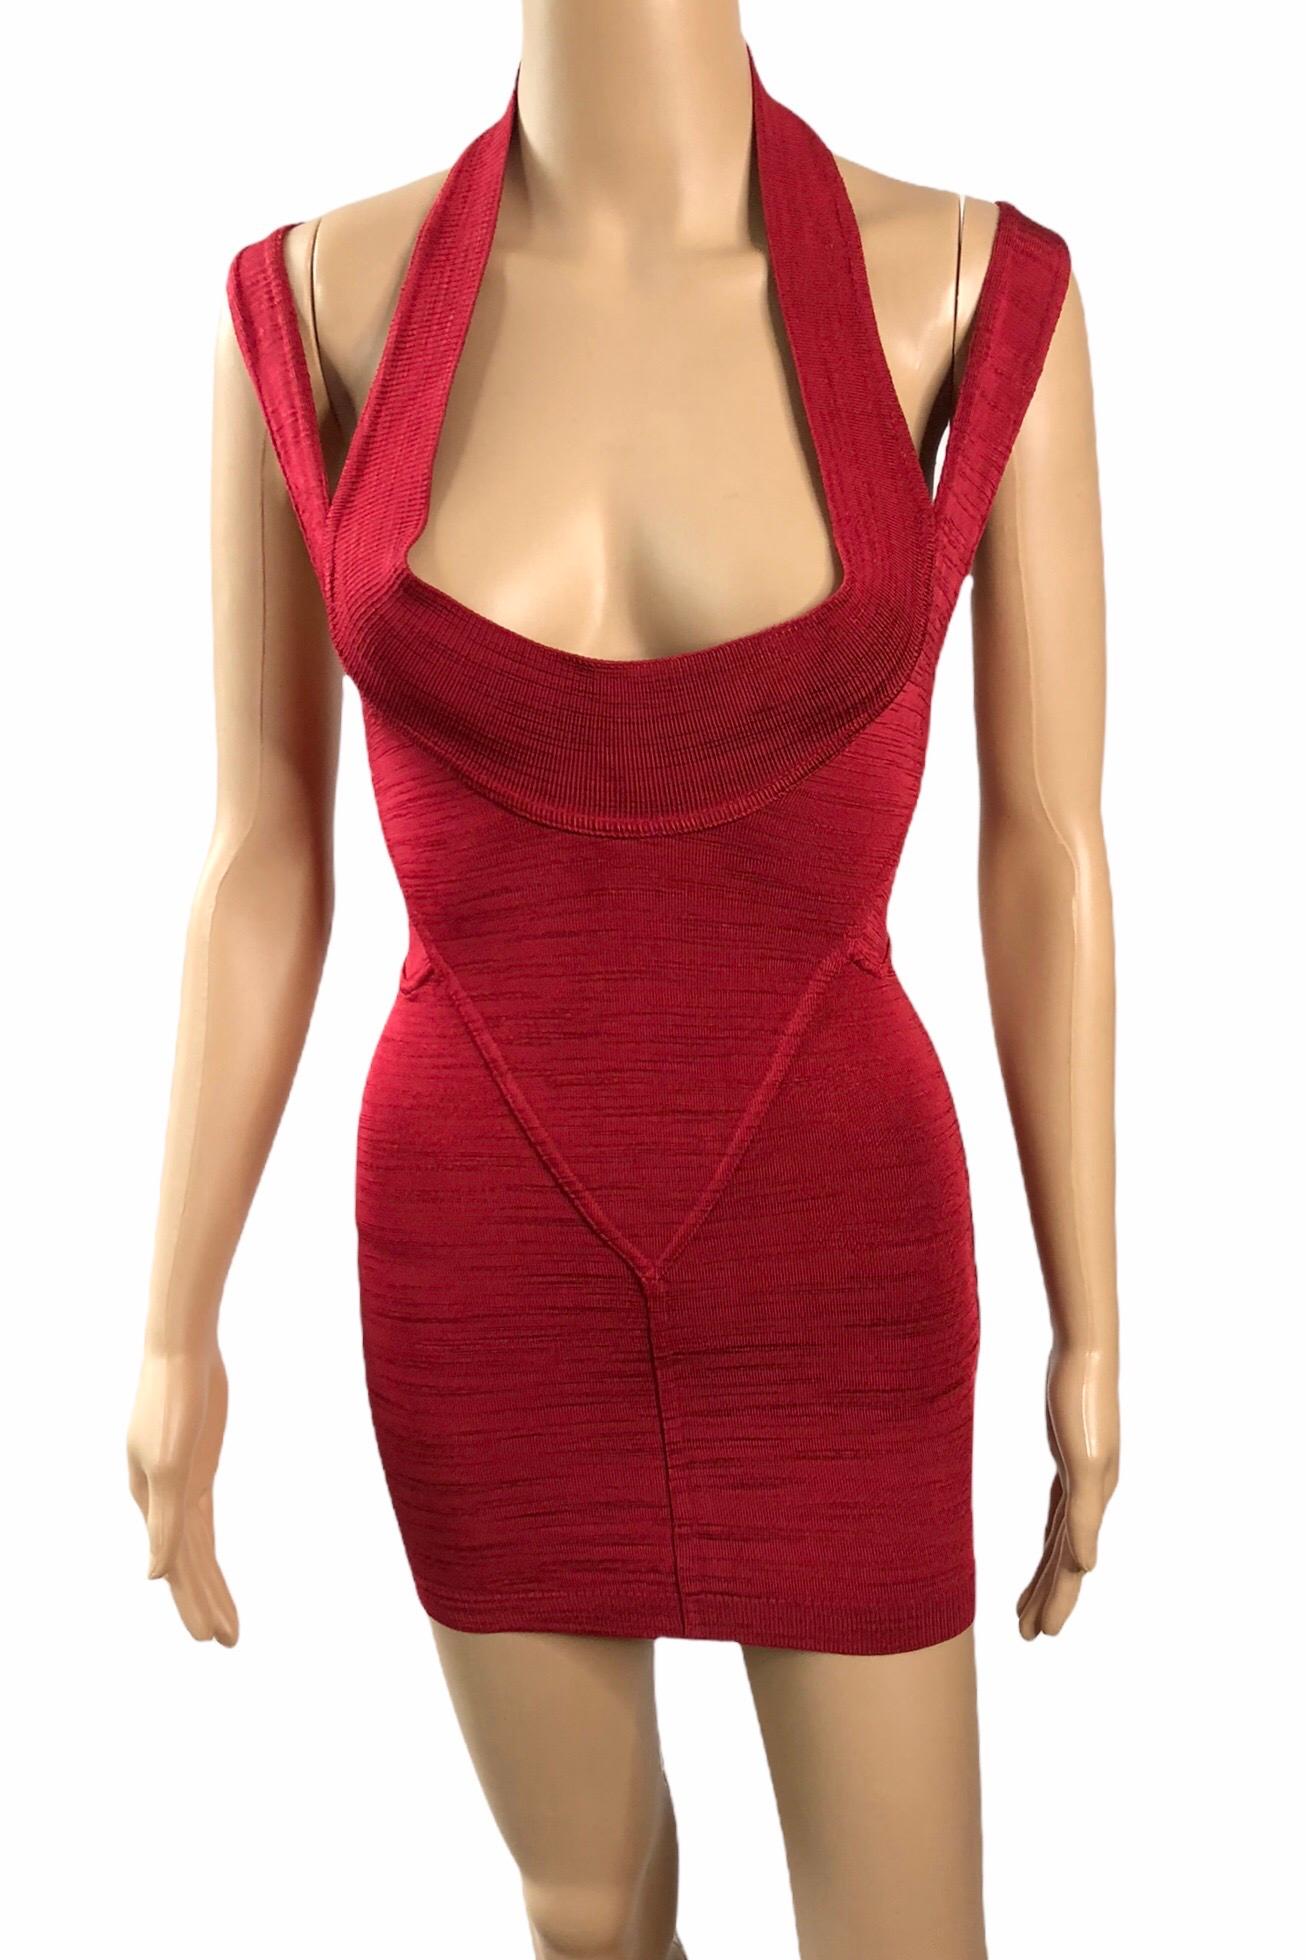 Azzedine Alaia S/S 1991 Vintage Bustier Cutout Bodycon Red Micro Mini Dress  In Excellent Condition For Sale In Naples, FL